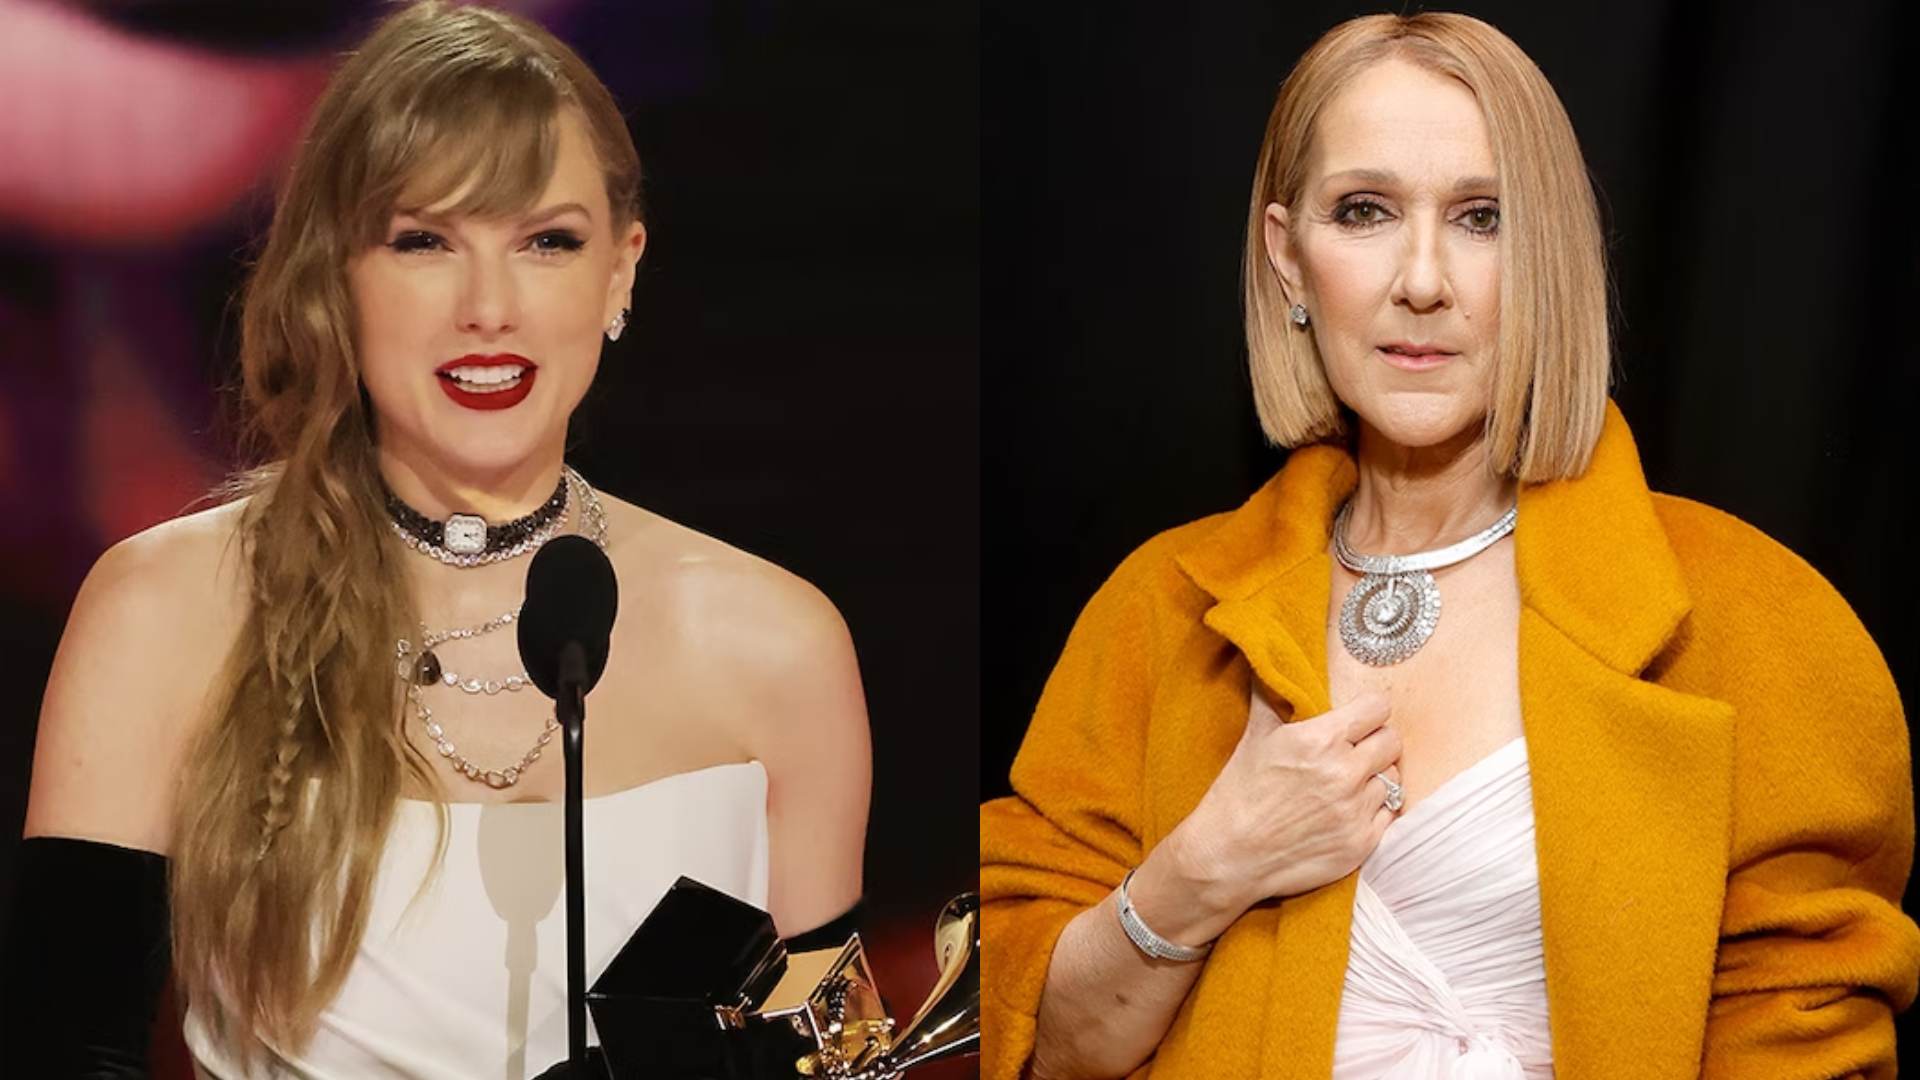 Taylor Swift hugged Celine Dion following backlash on her Album of the Year Grammy win